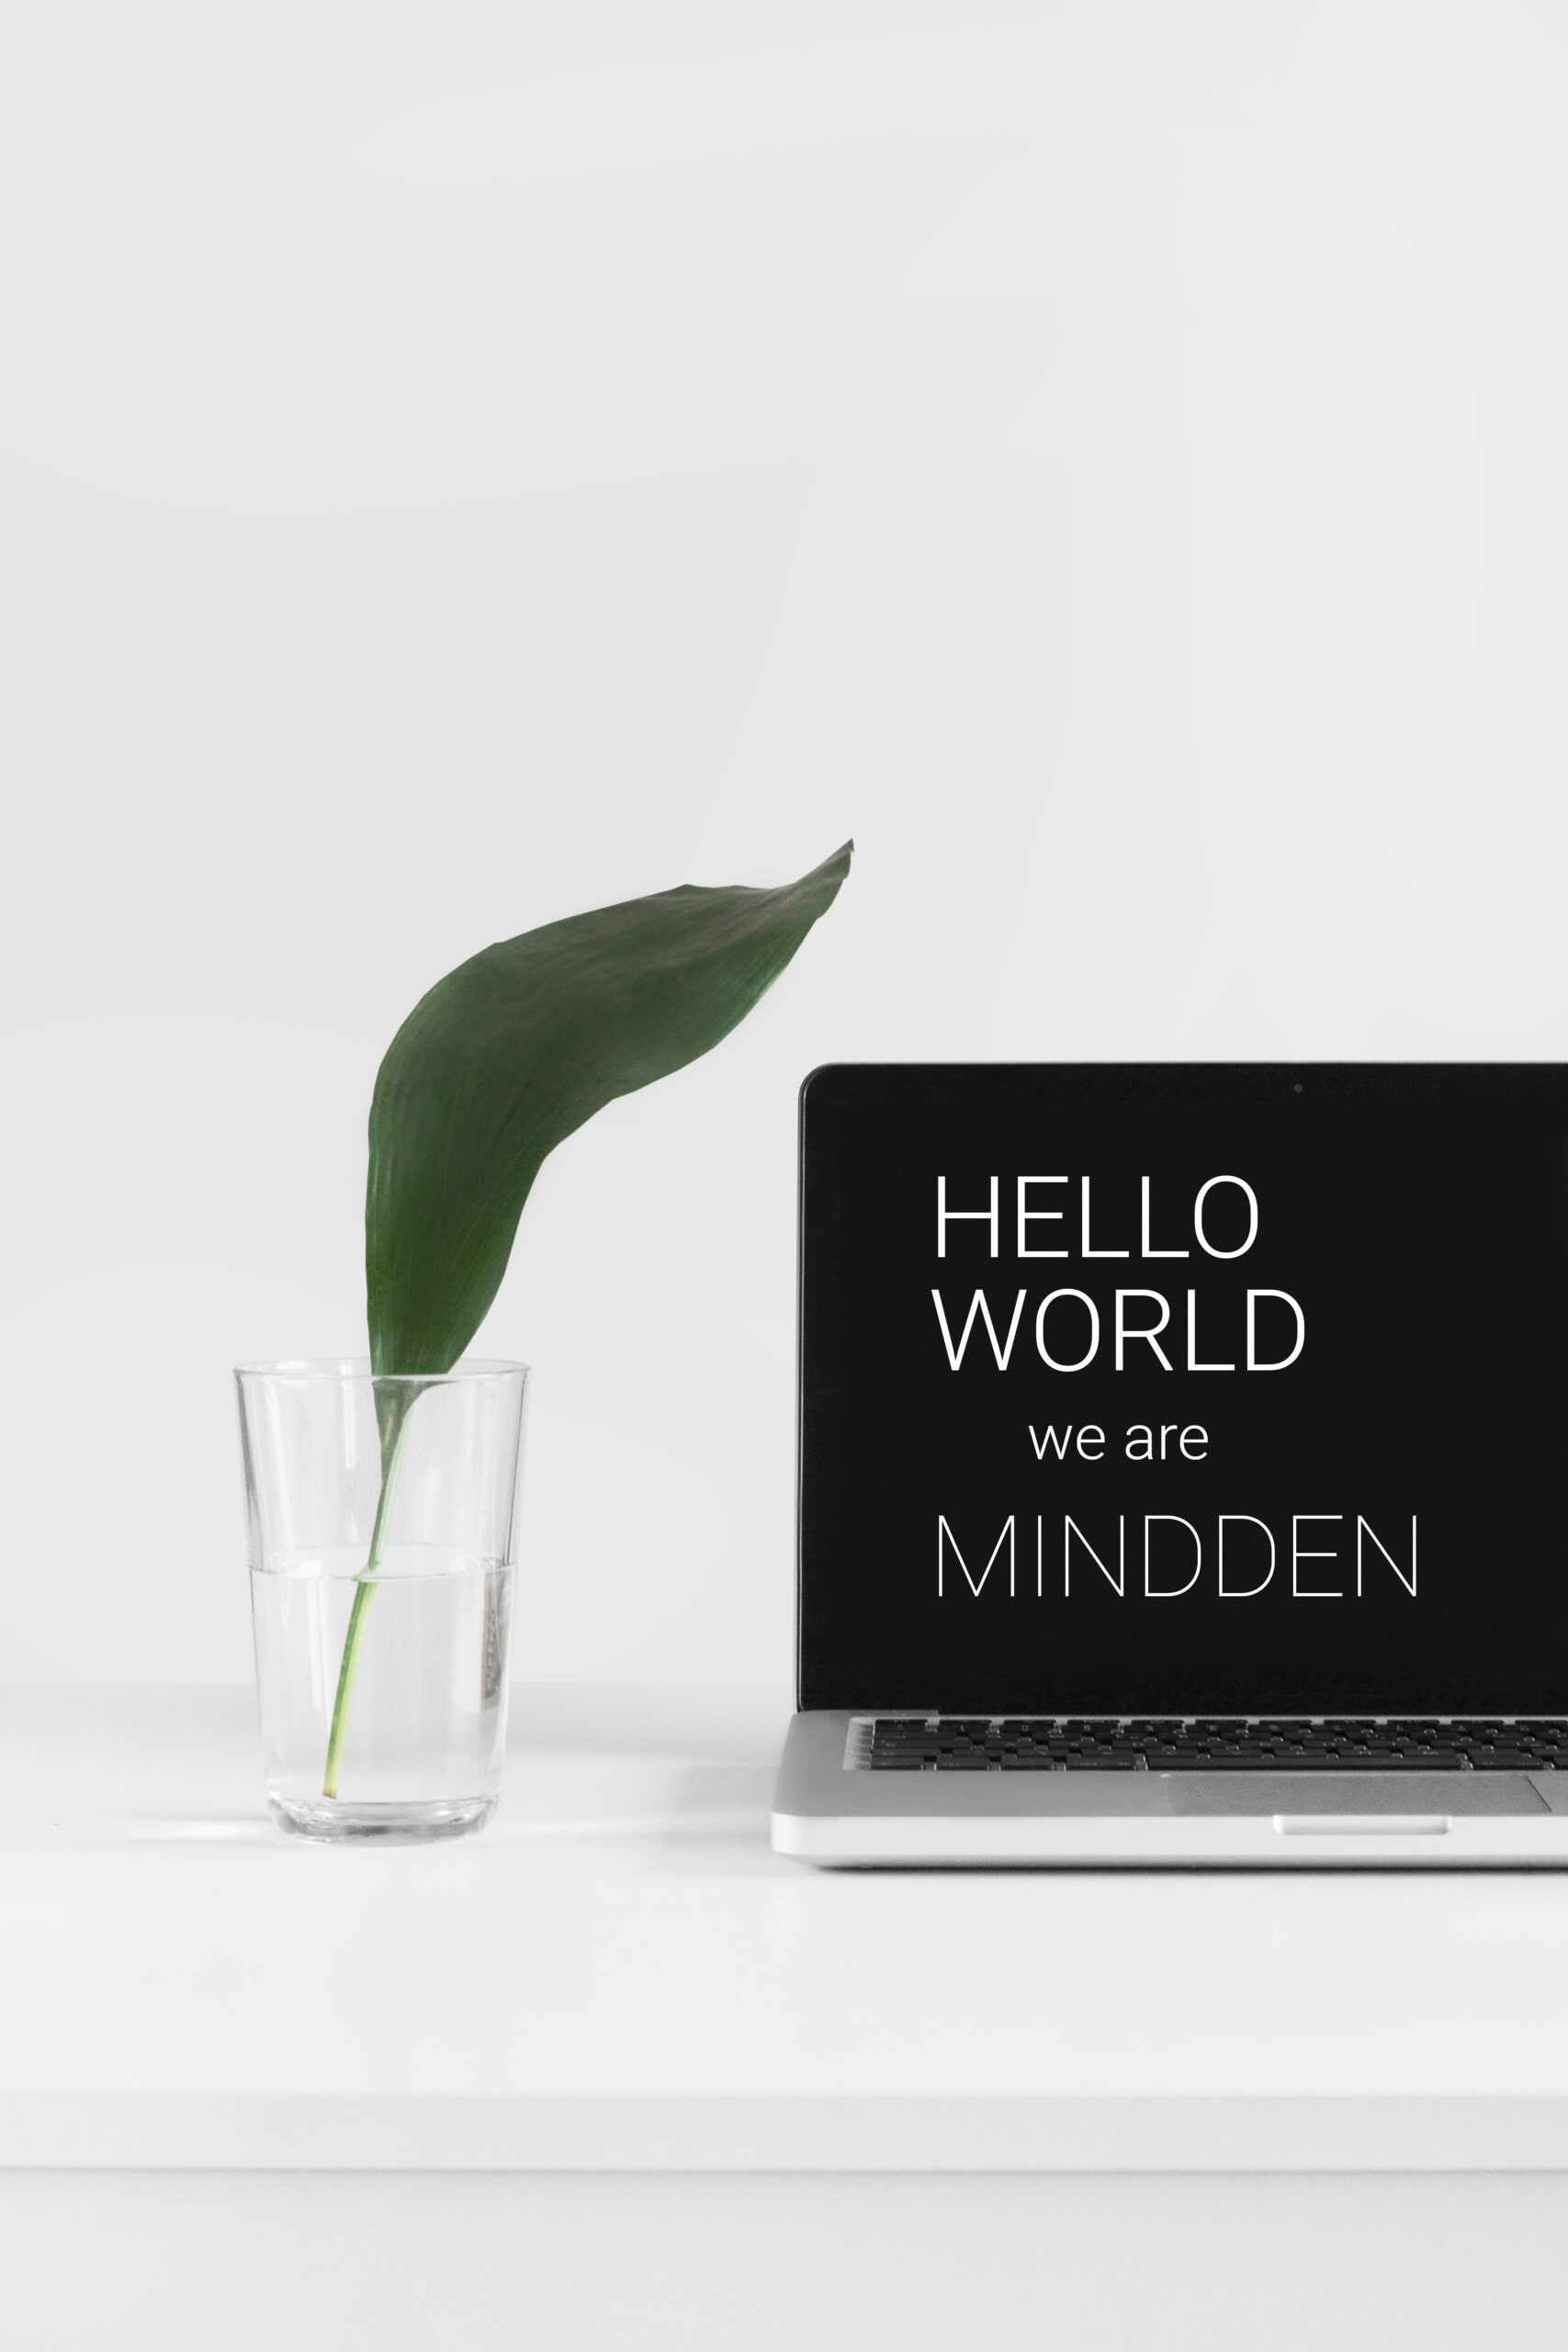 Mindden, a large family with over 70 professionals